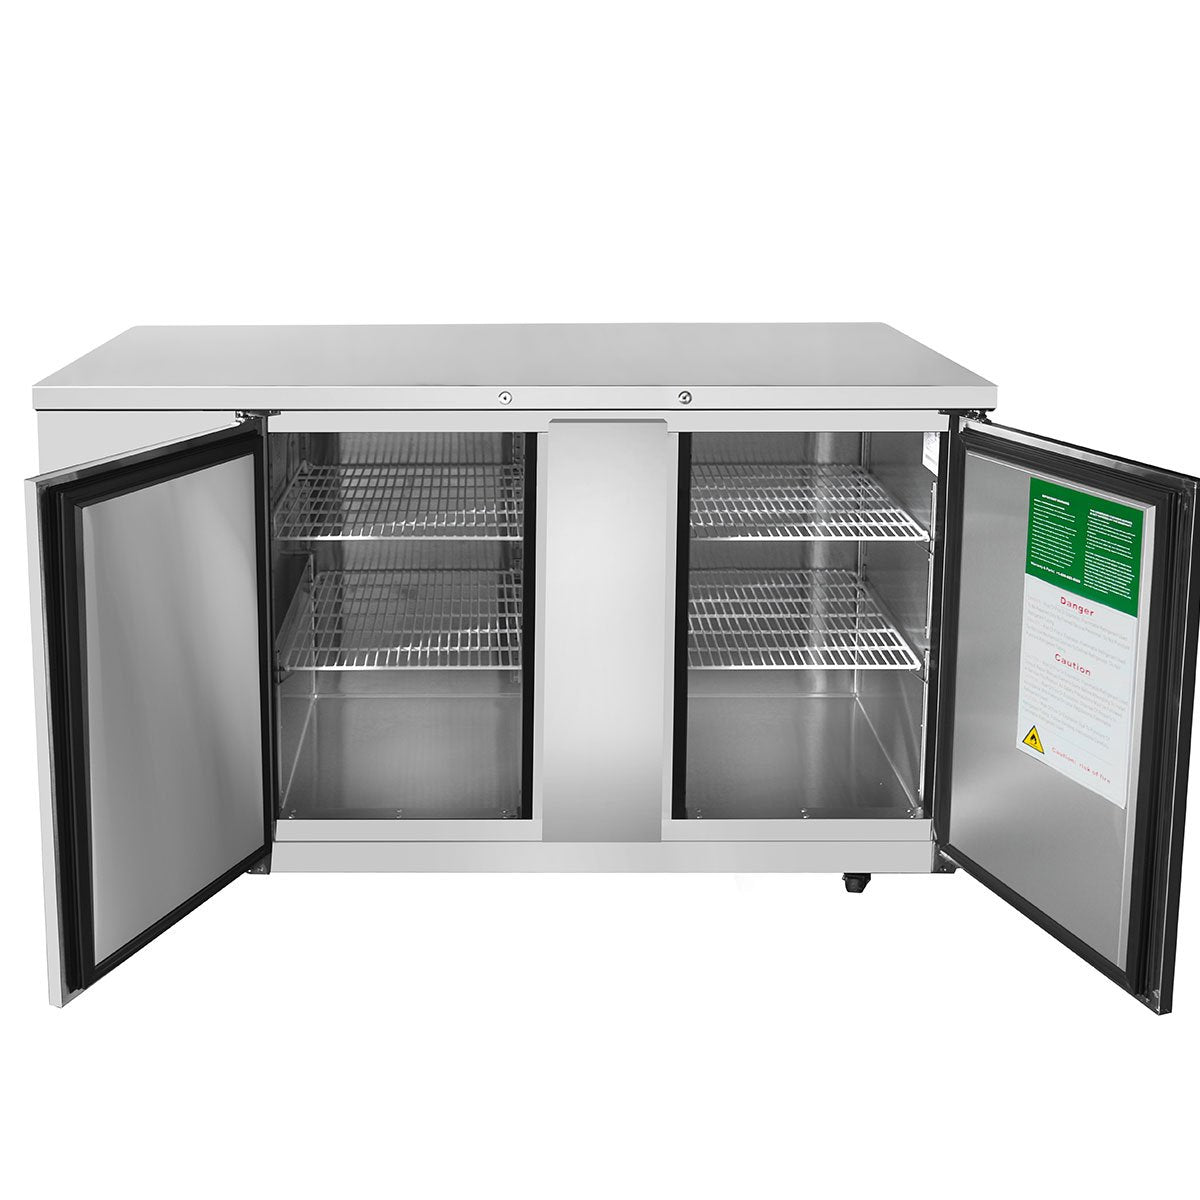 Atosa MBB69GR 69" Back Bar Cooler - Stainless Steel